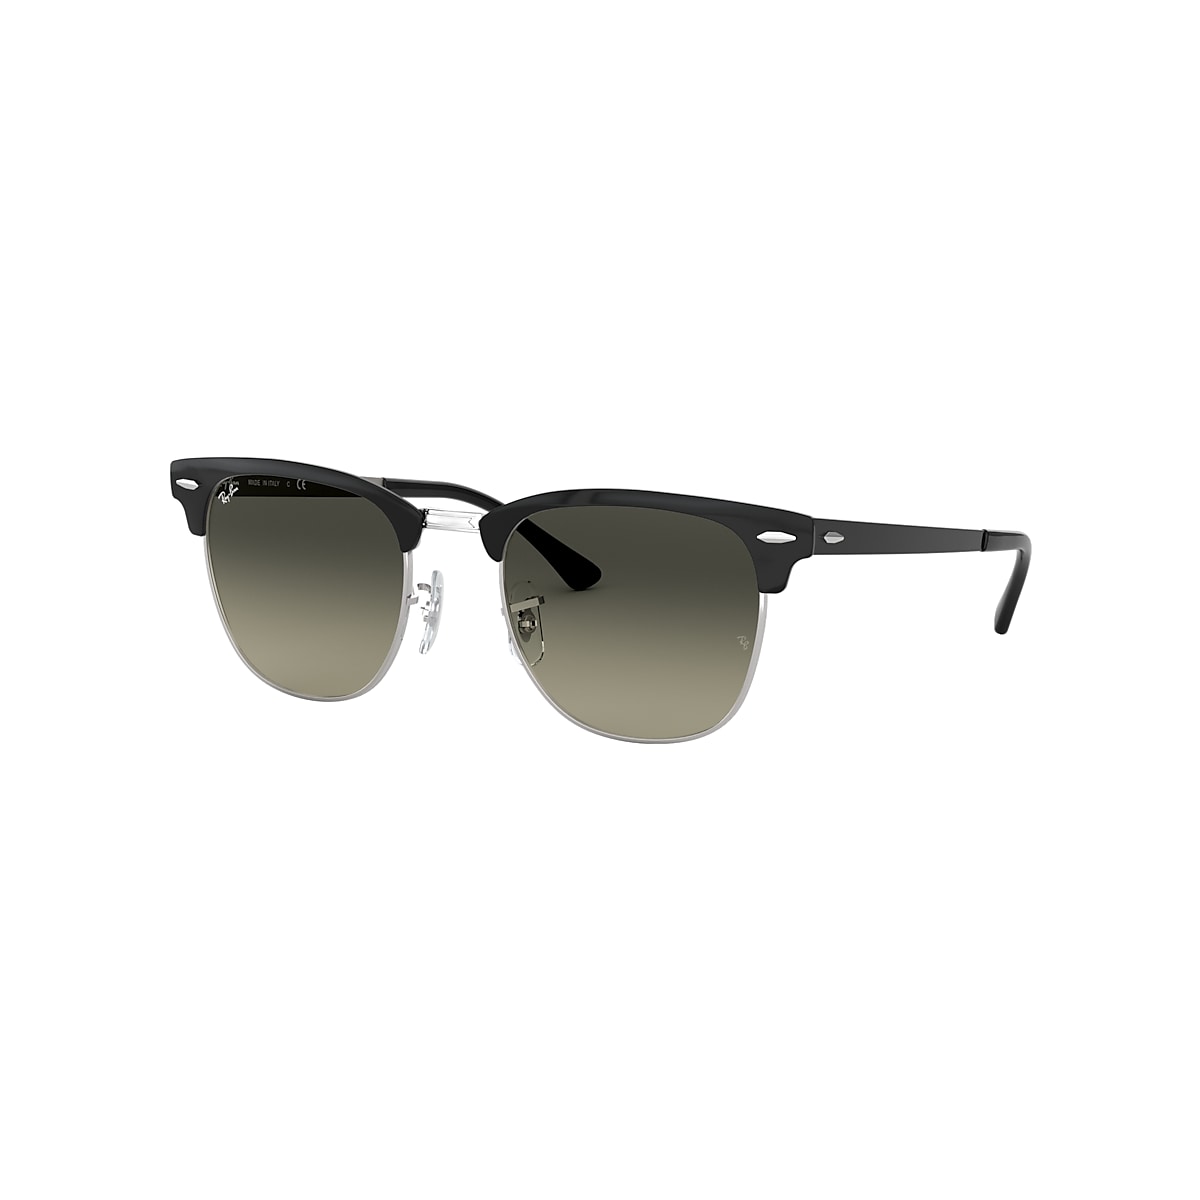 CLUBMASTER METAL Sunglasses in Black On Silver and Grey - RB3716 